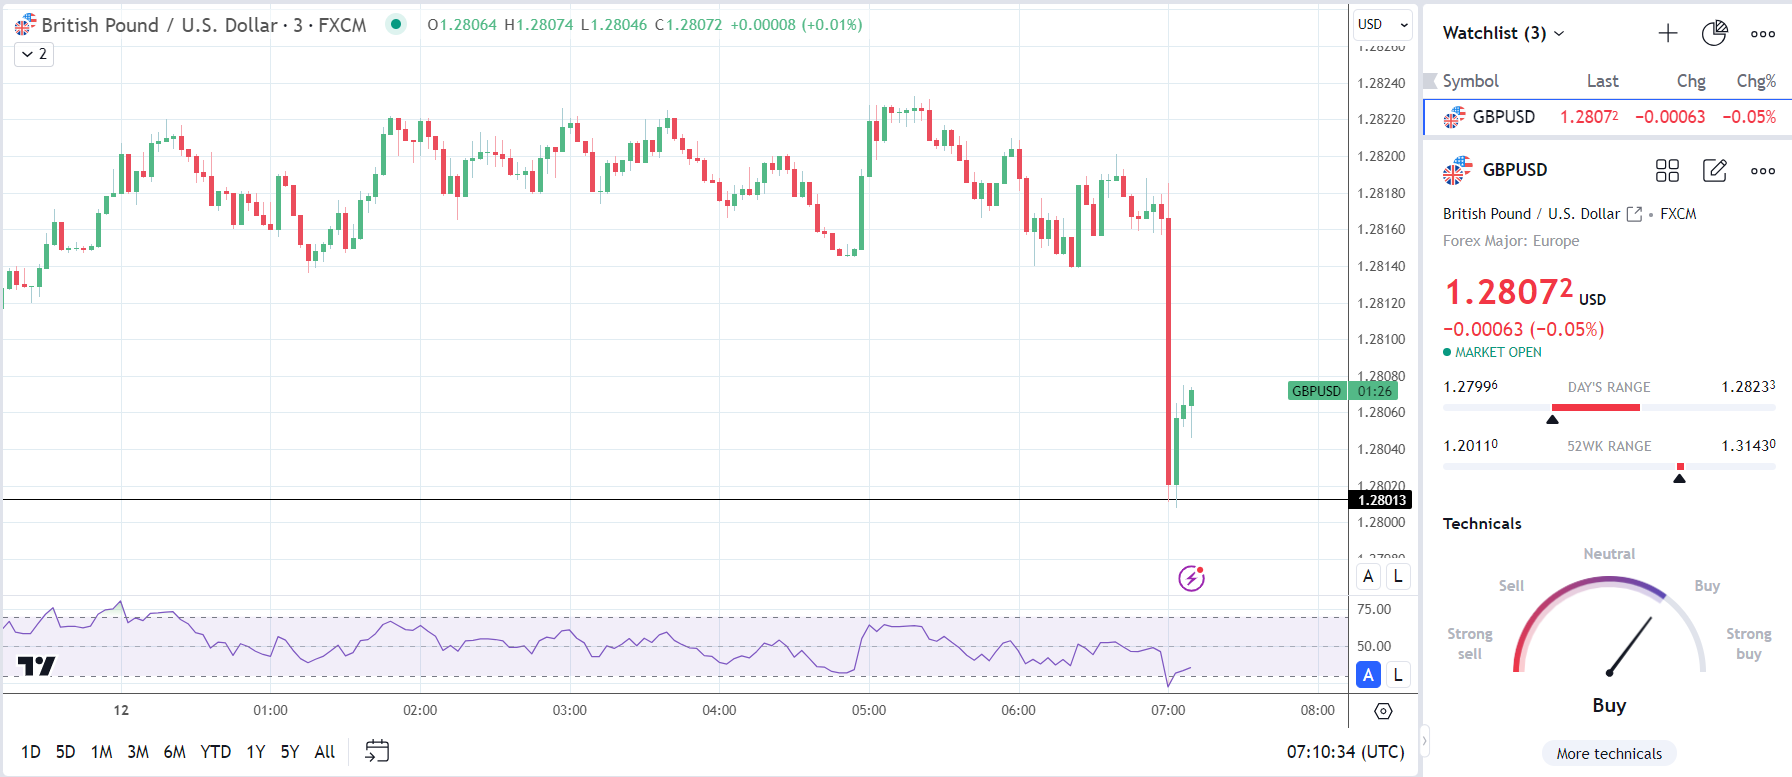 GBP/USD reacts to UK Unemployment rate and wage growth figures.